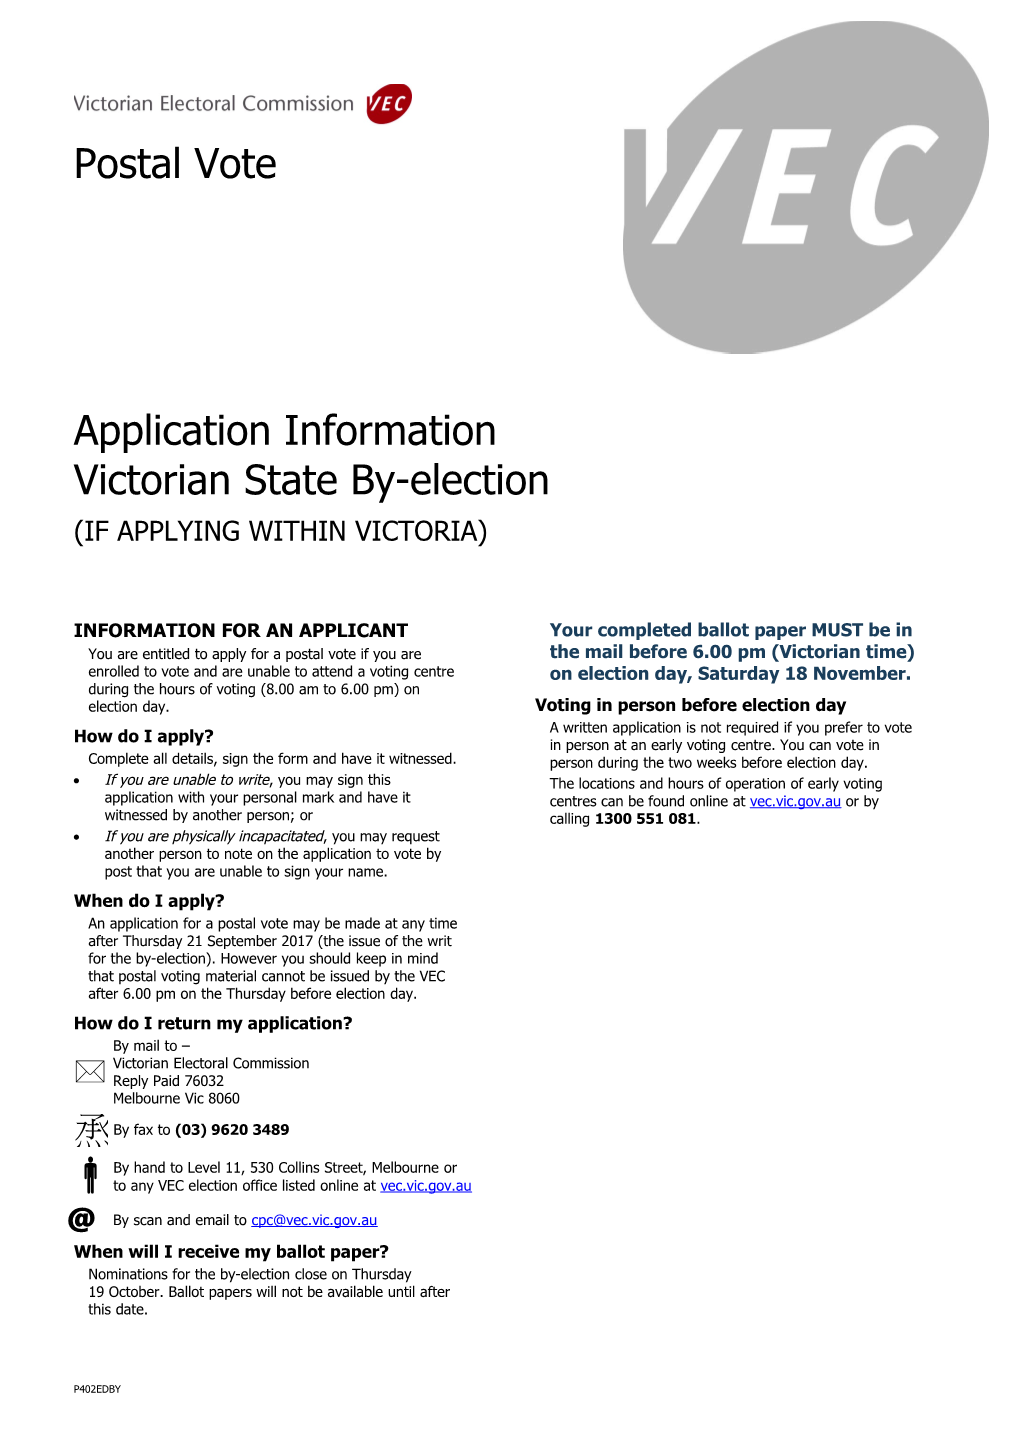 Postal Vote Application Information Victorian State By-Election